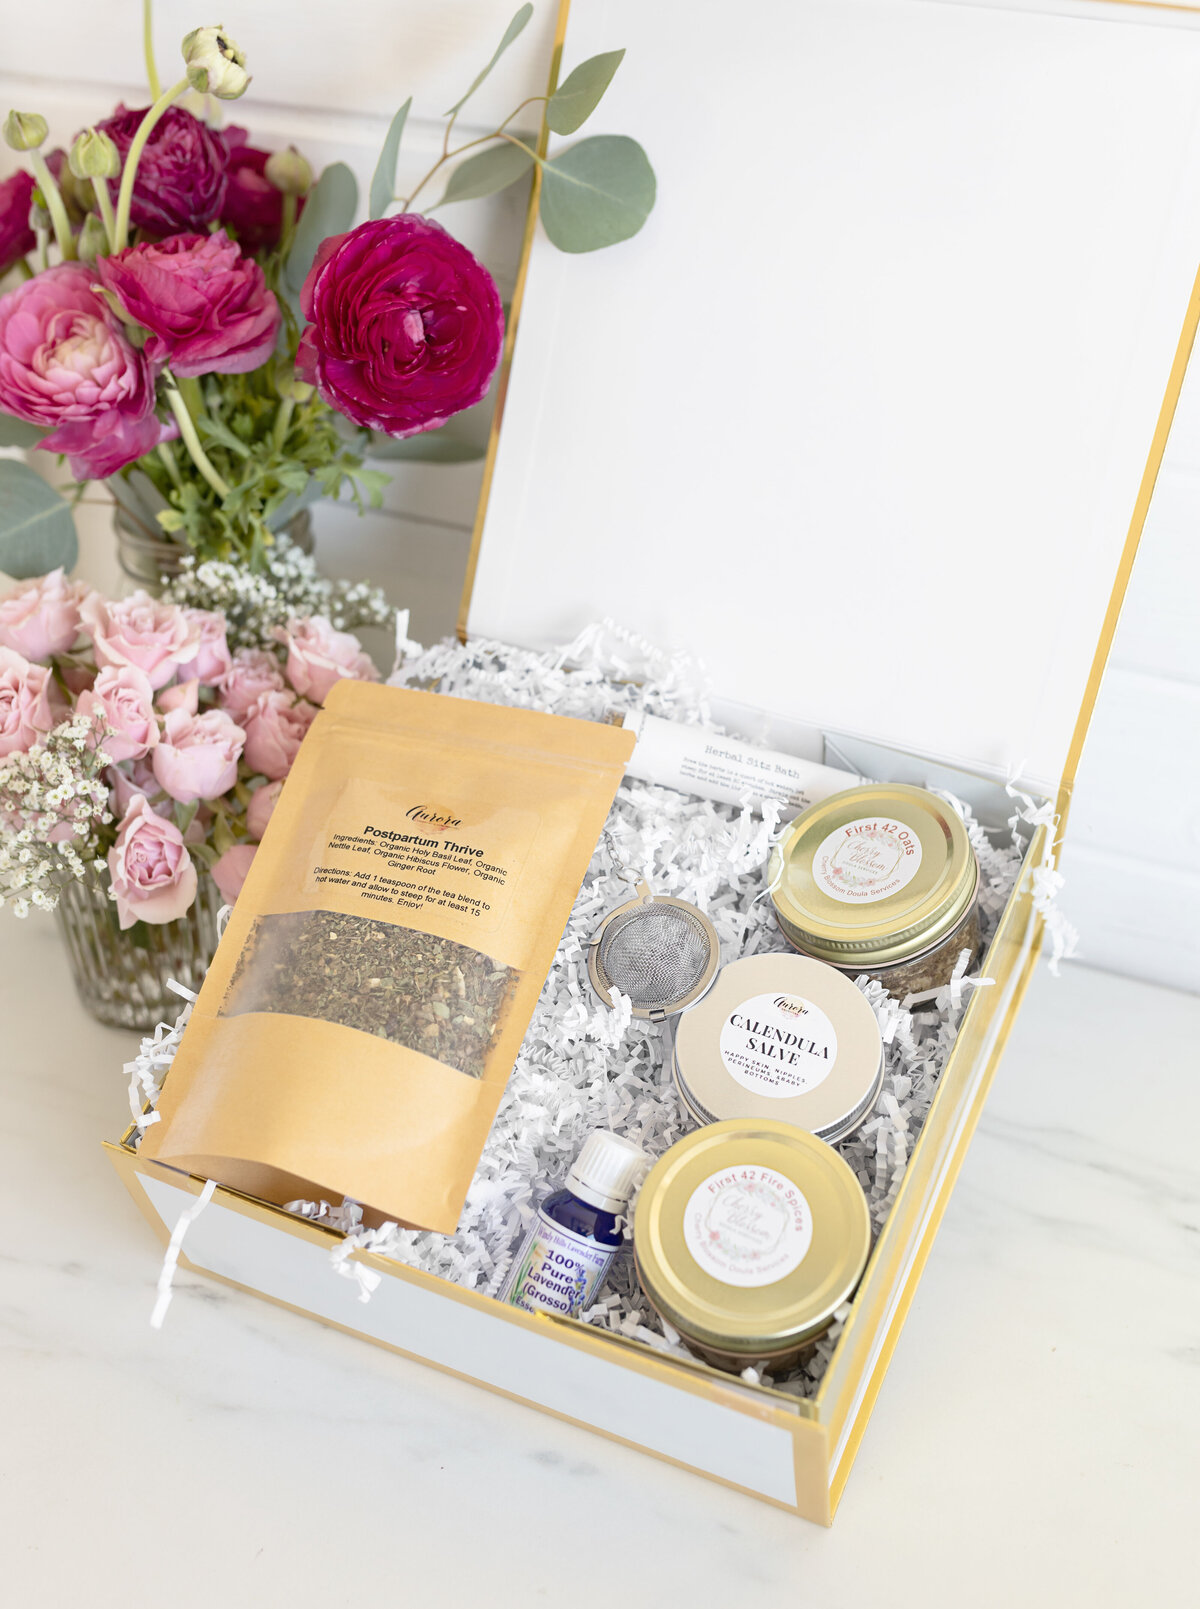 Dried postpartum tea in a bag with glass jars in a gift box